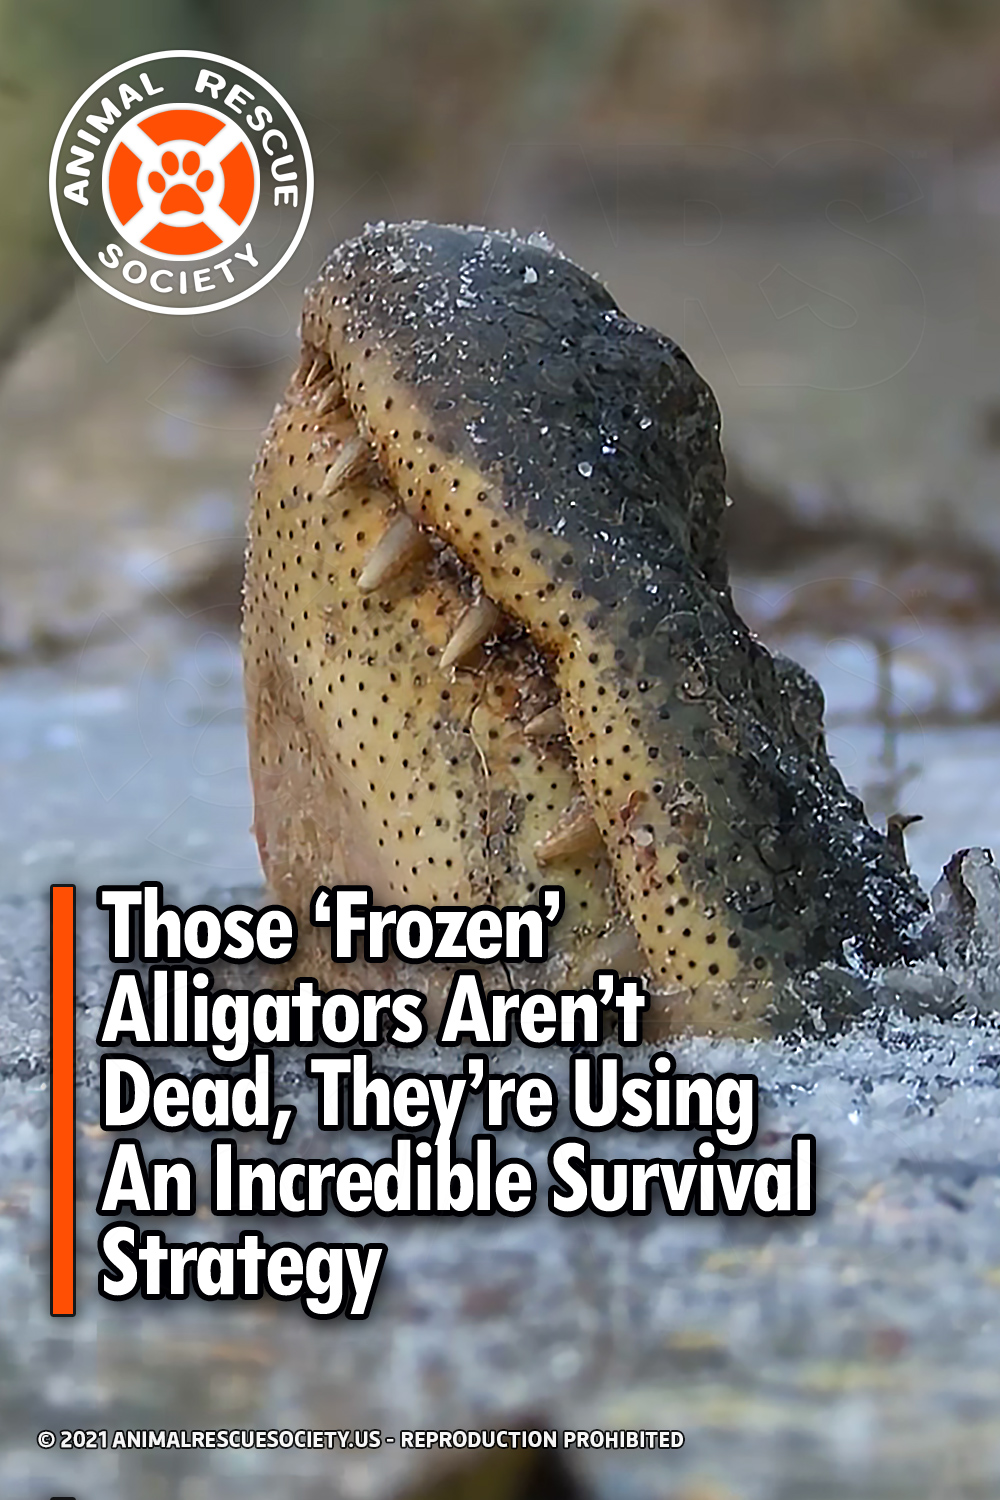 Those ‘Frozen’ Alligators Aren’t Dead, They’re Using An Incredible Survival Strategy